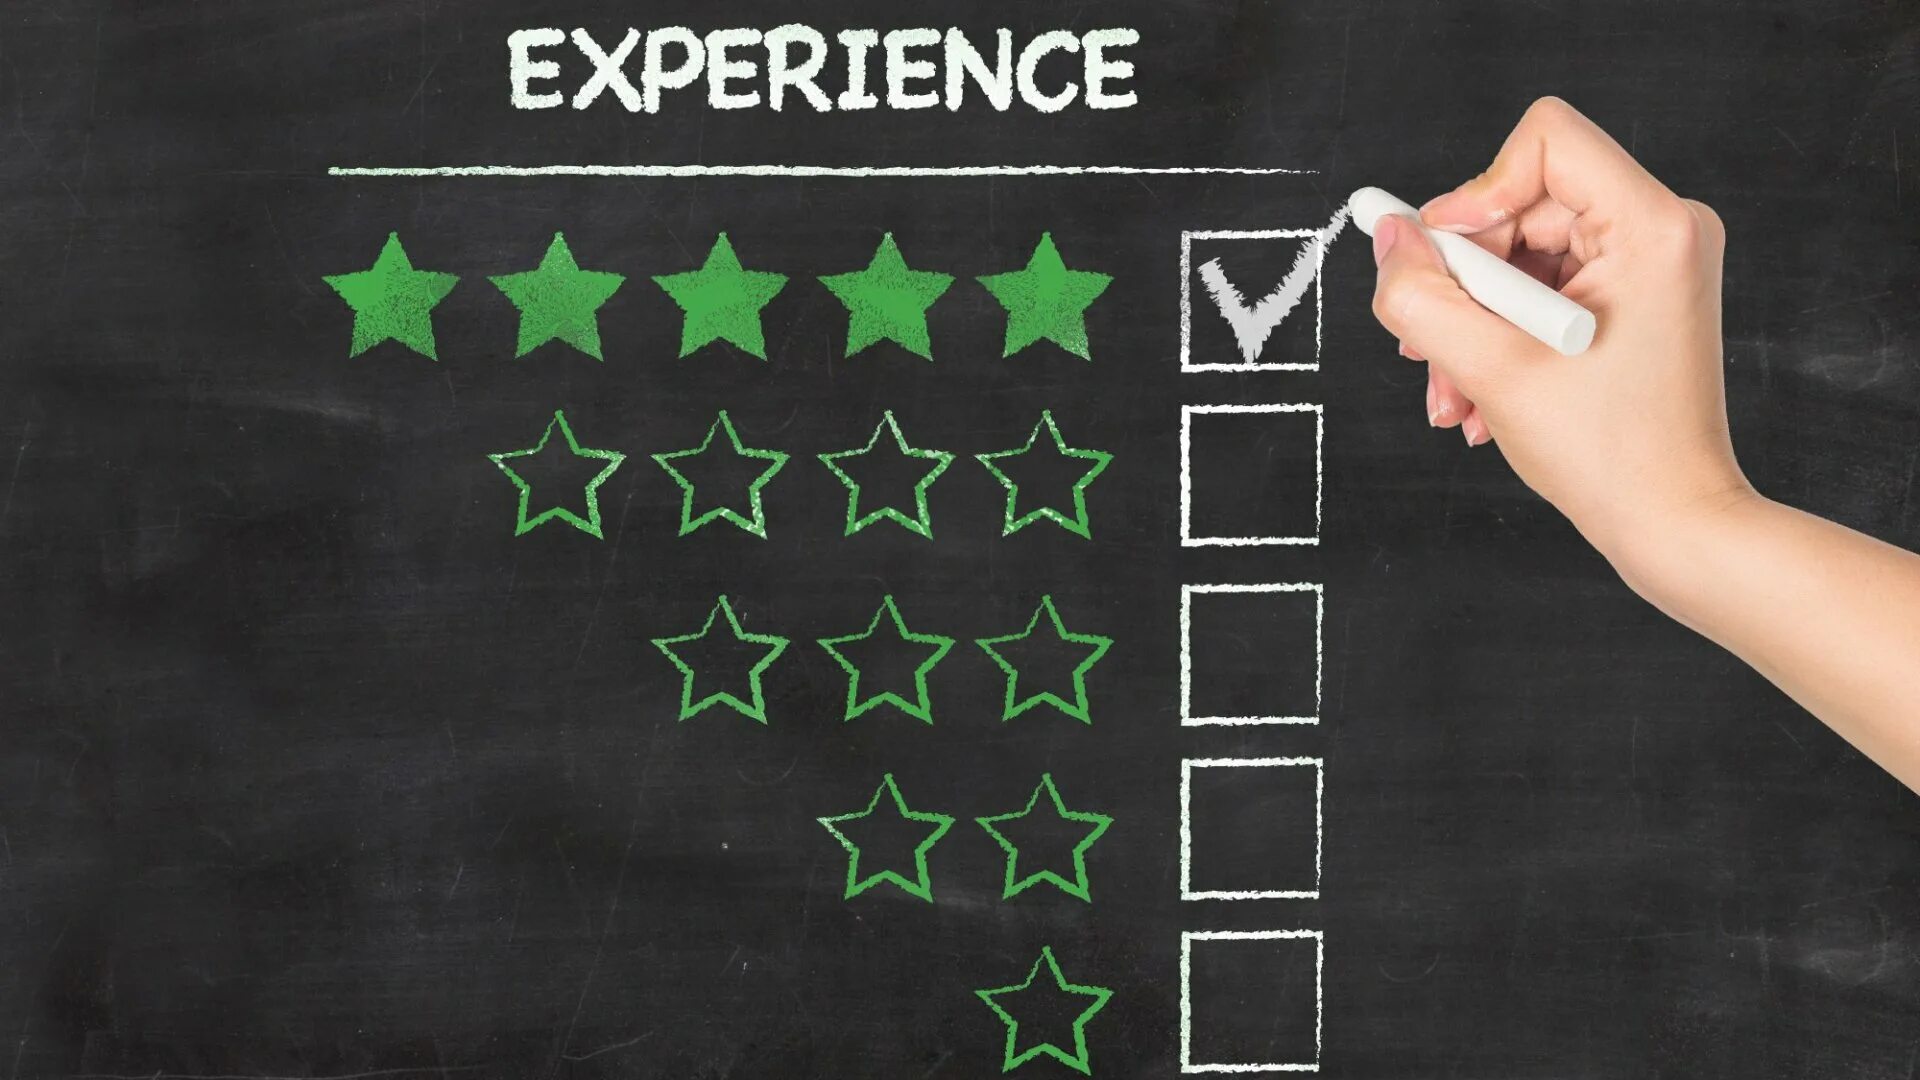 Experience. Experience опыт. My experience. Be my experience. Quality experience